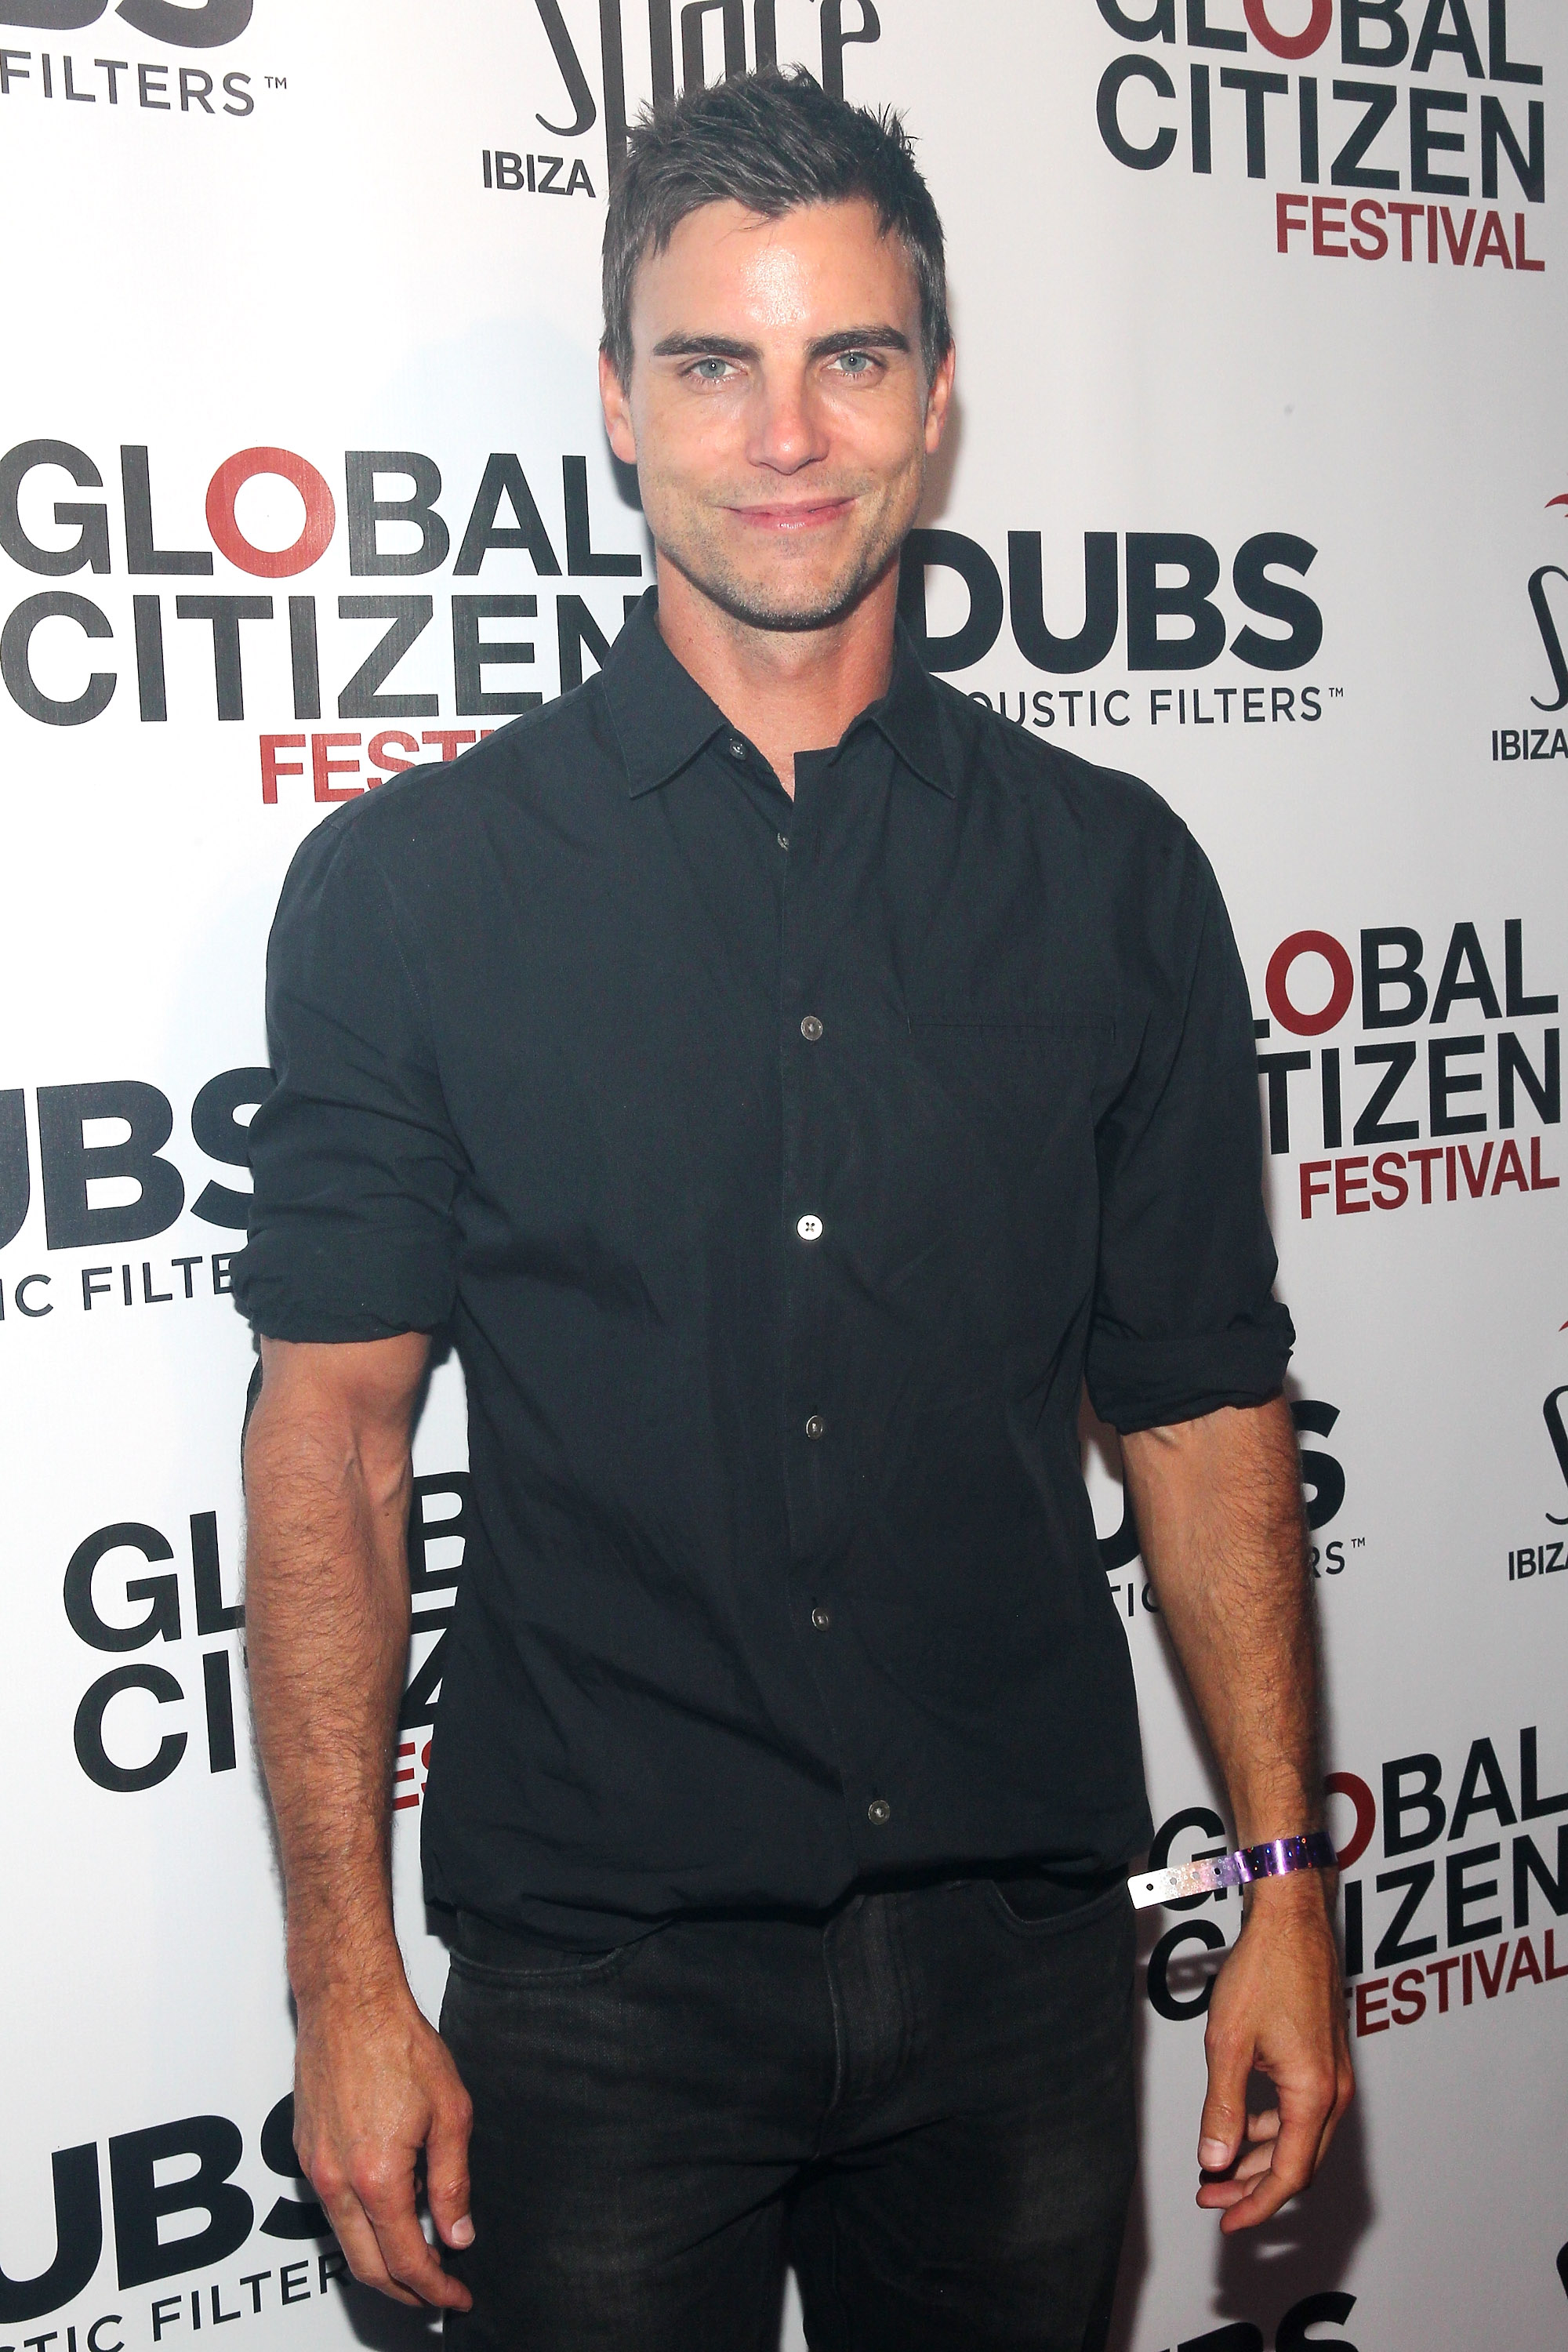 Actor Colin Egglesfield attends the Global Citizen Festival official after party at Space Ibiza NY